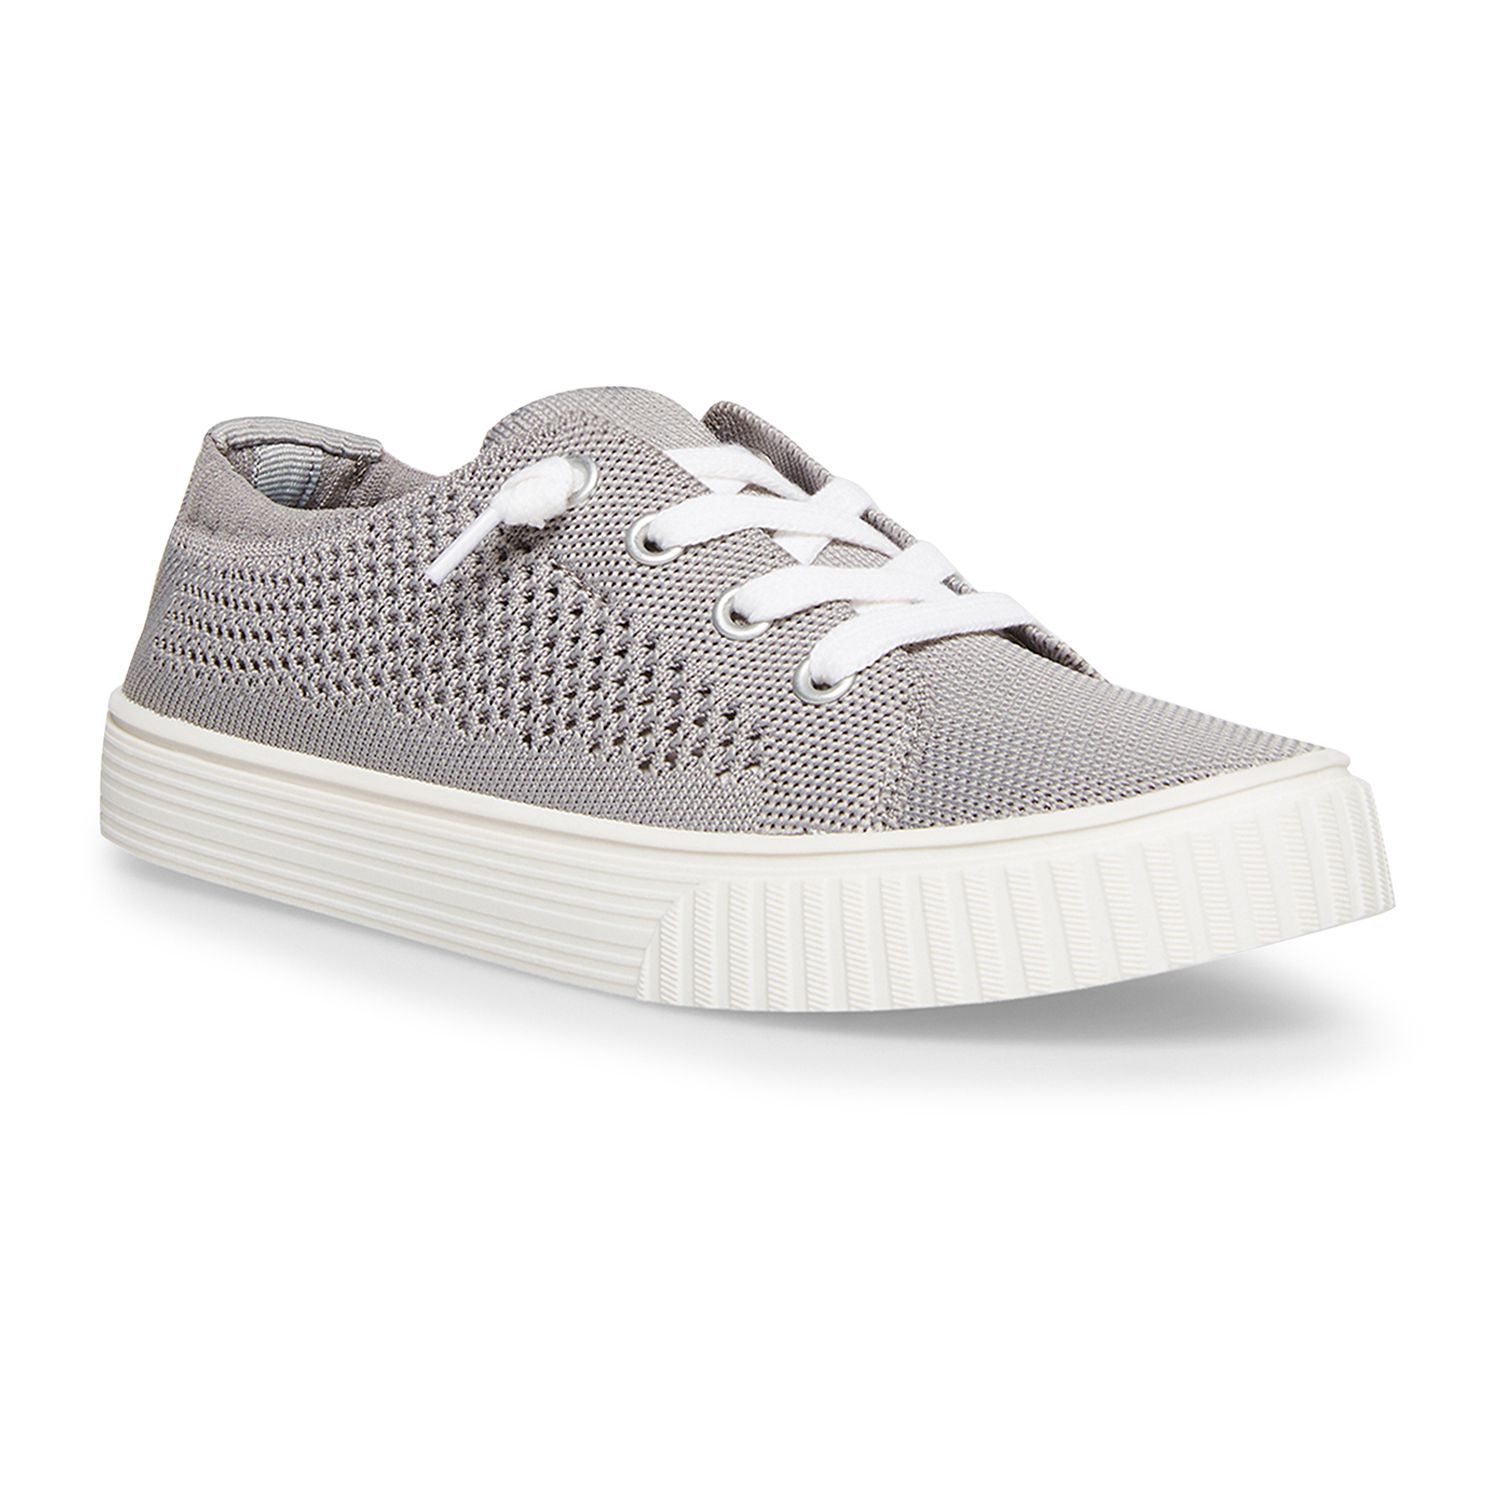 grey athletic shoes